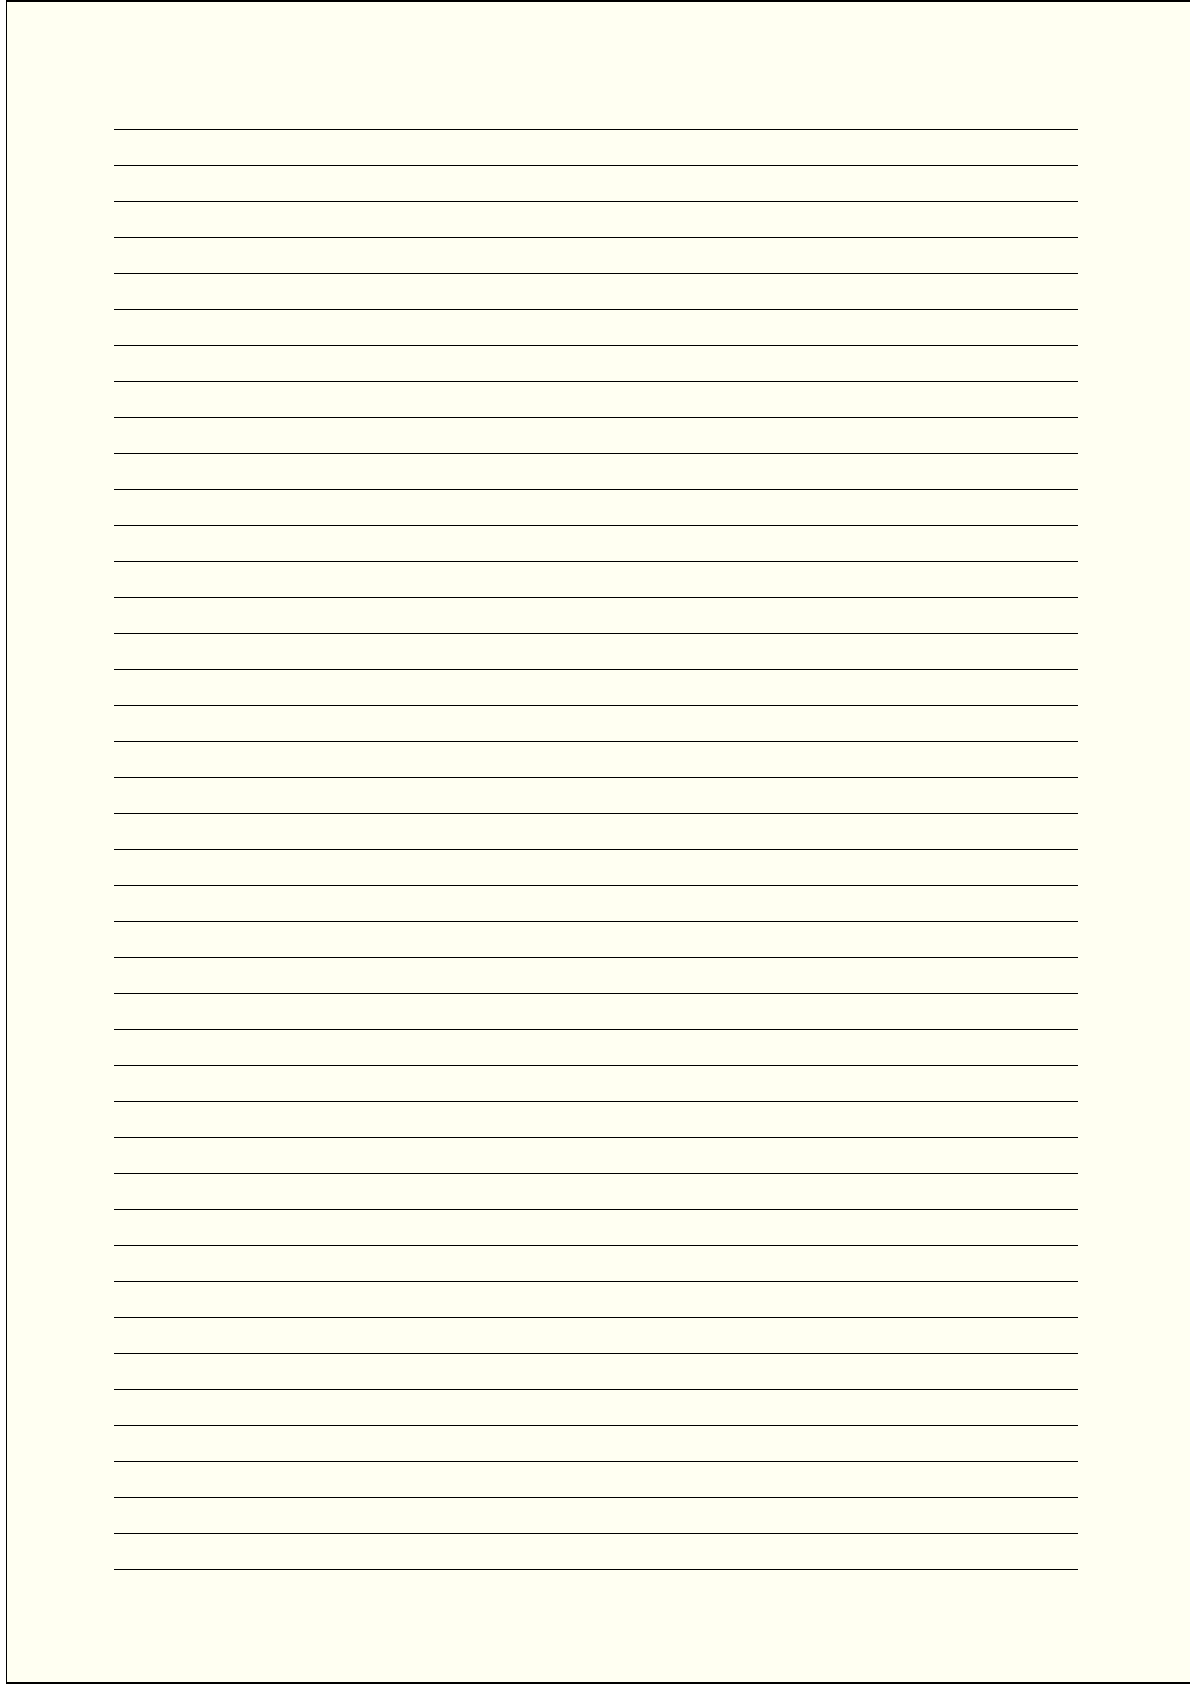 Printable Lined Paper A4 Free